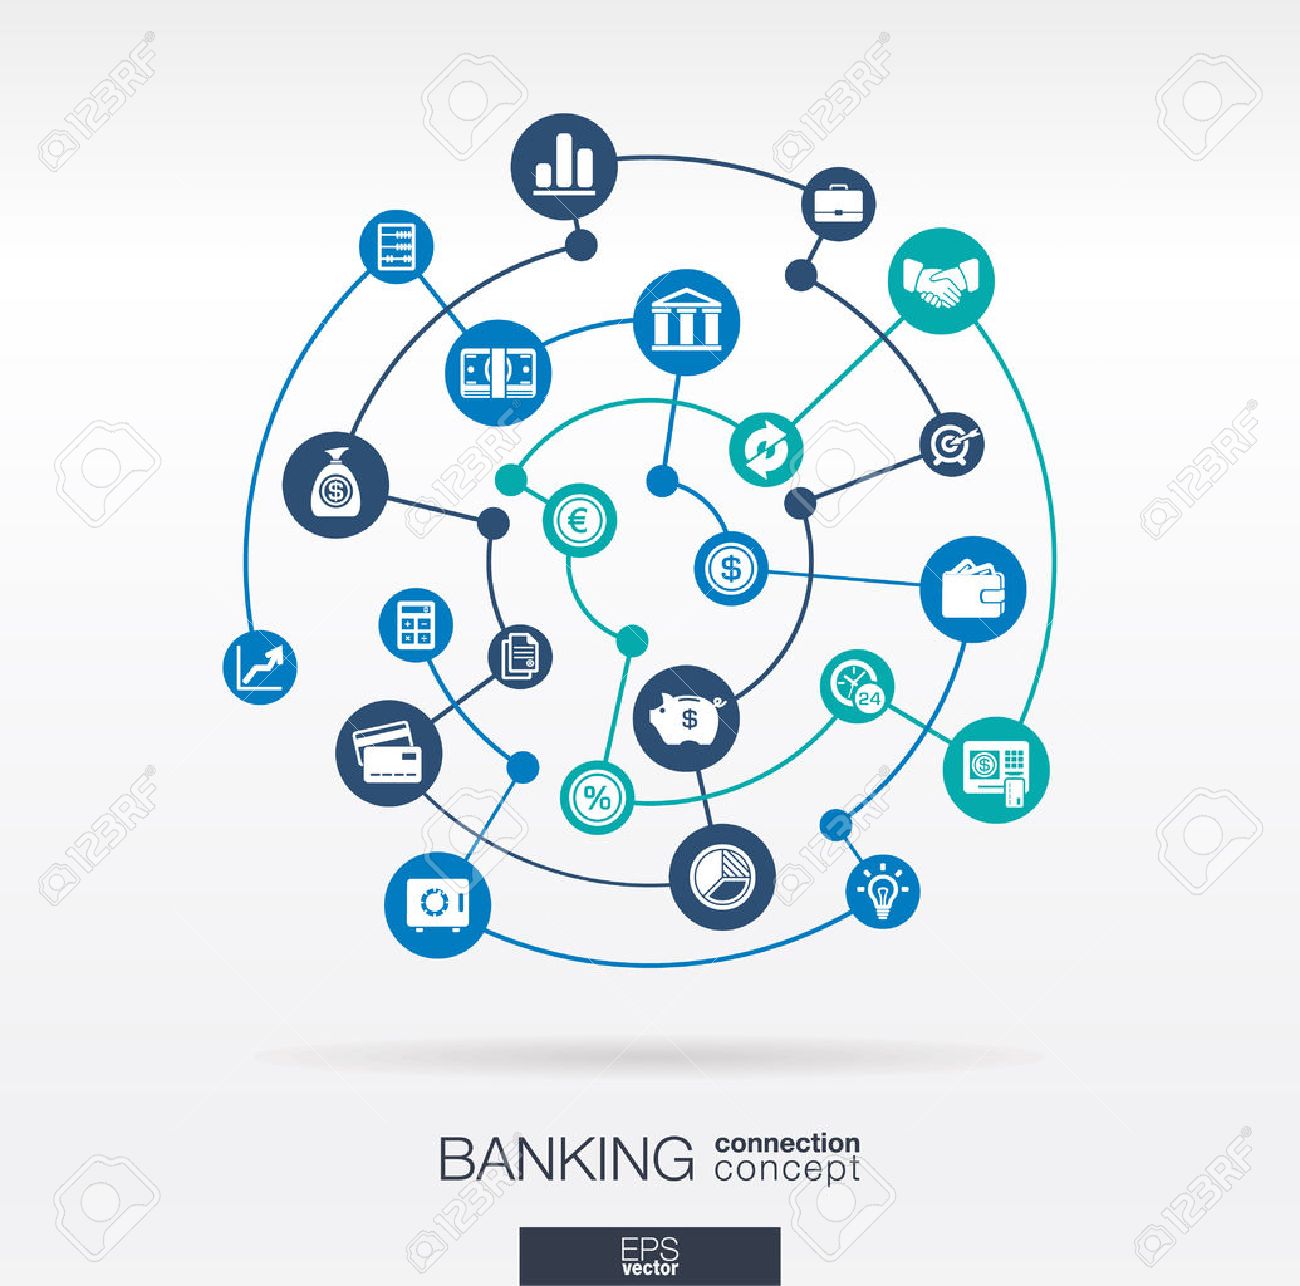 Banking Network Circles Abstract Background With Lines And